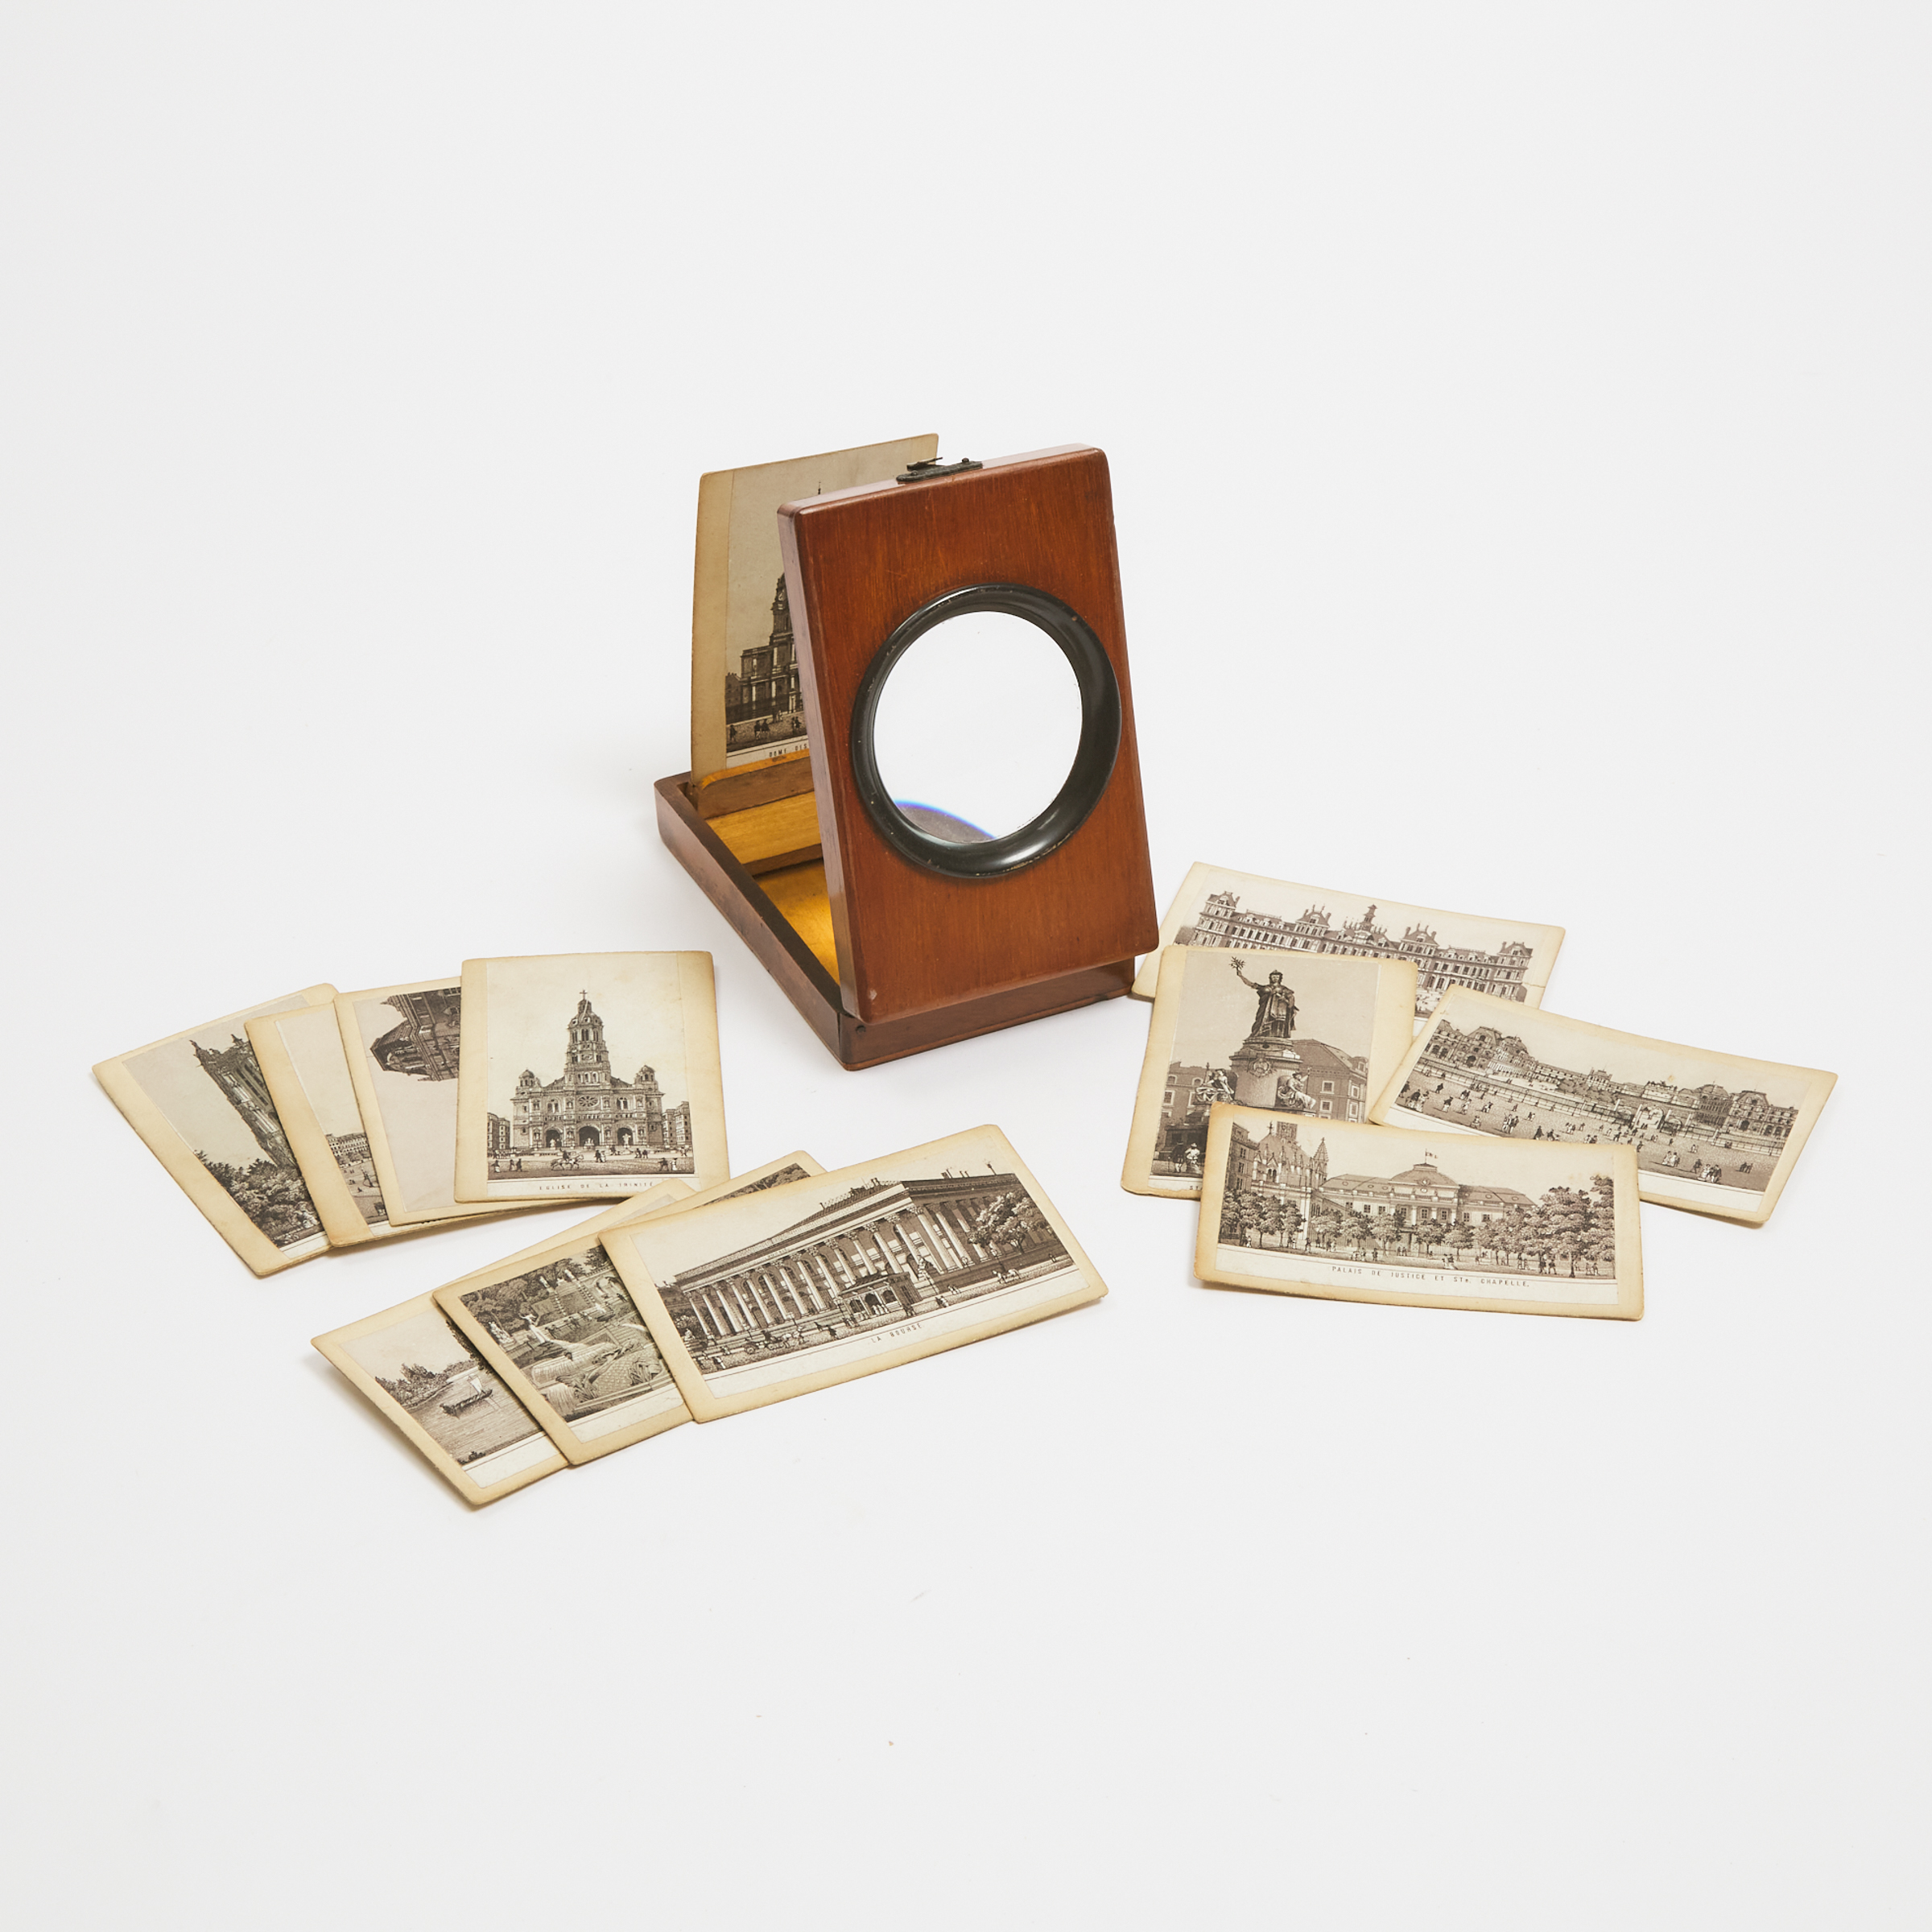 French Optical Card Viewer by Ancienne Maison Martinet, Paris, 19th century